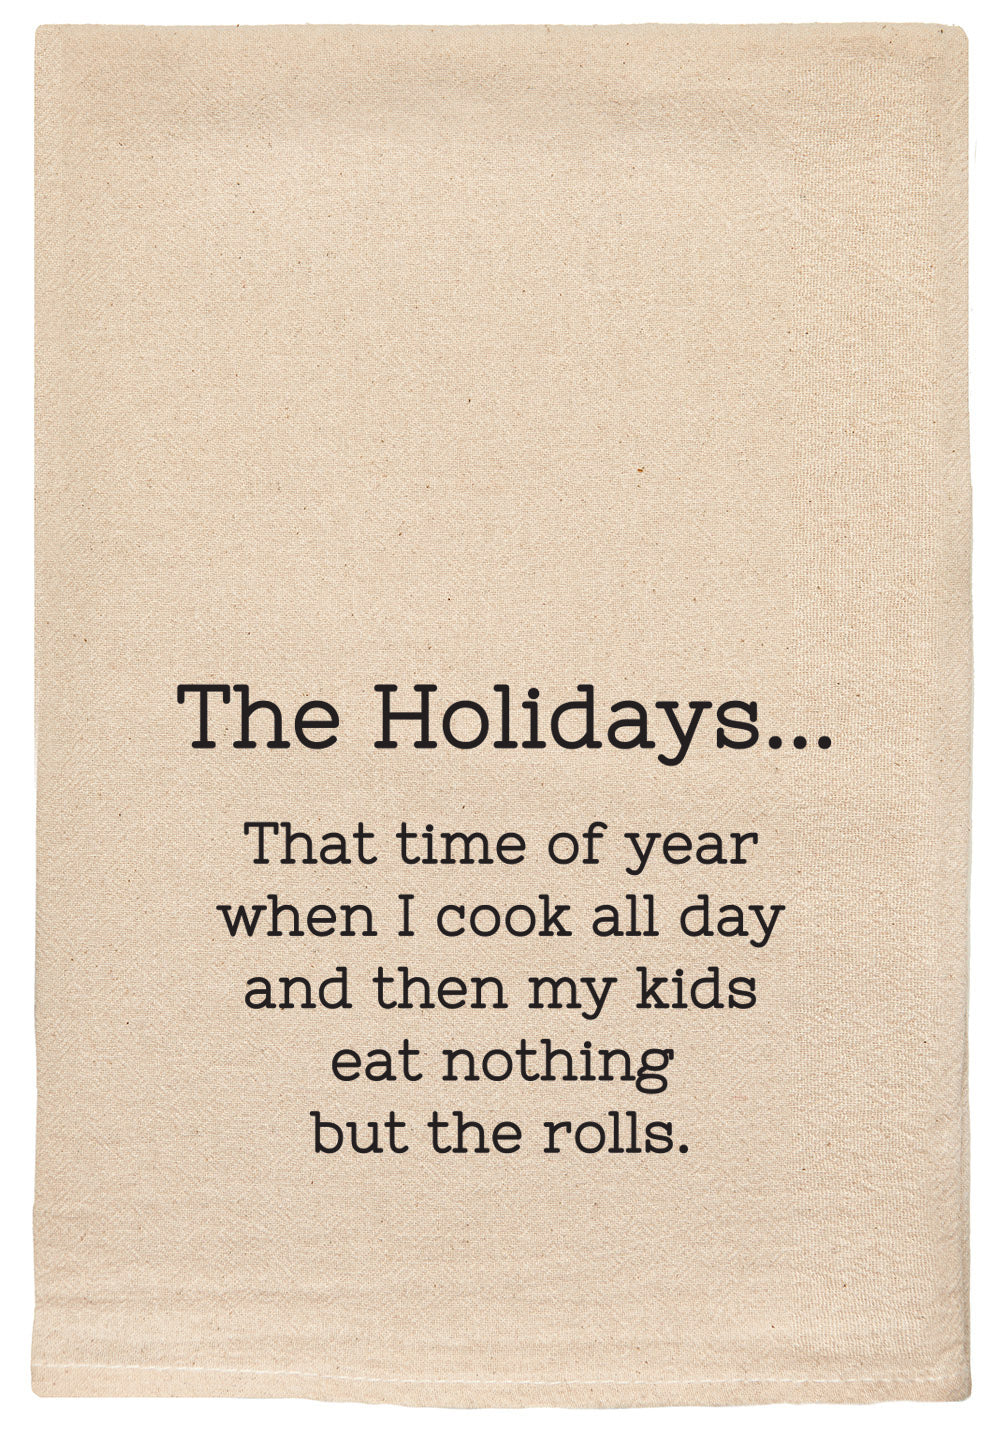 The Holidays... That time of the year when I cook all day and then my kids eat nothing but the rolls.